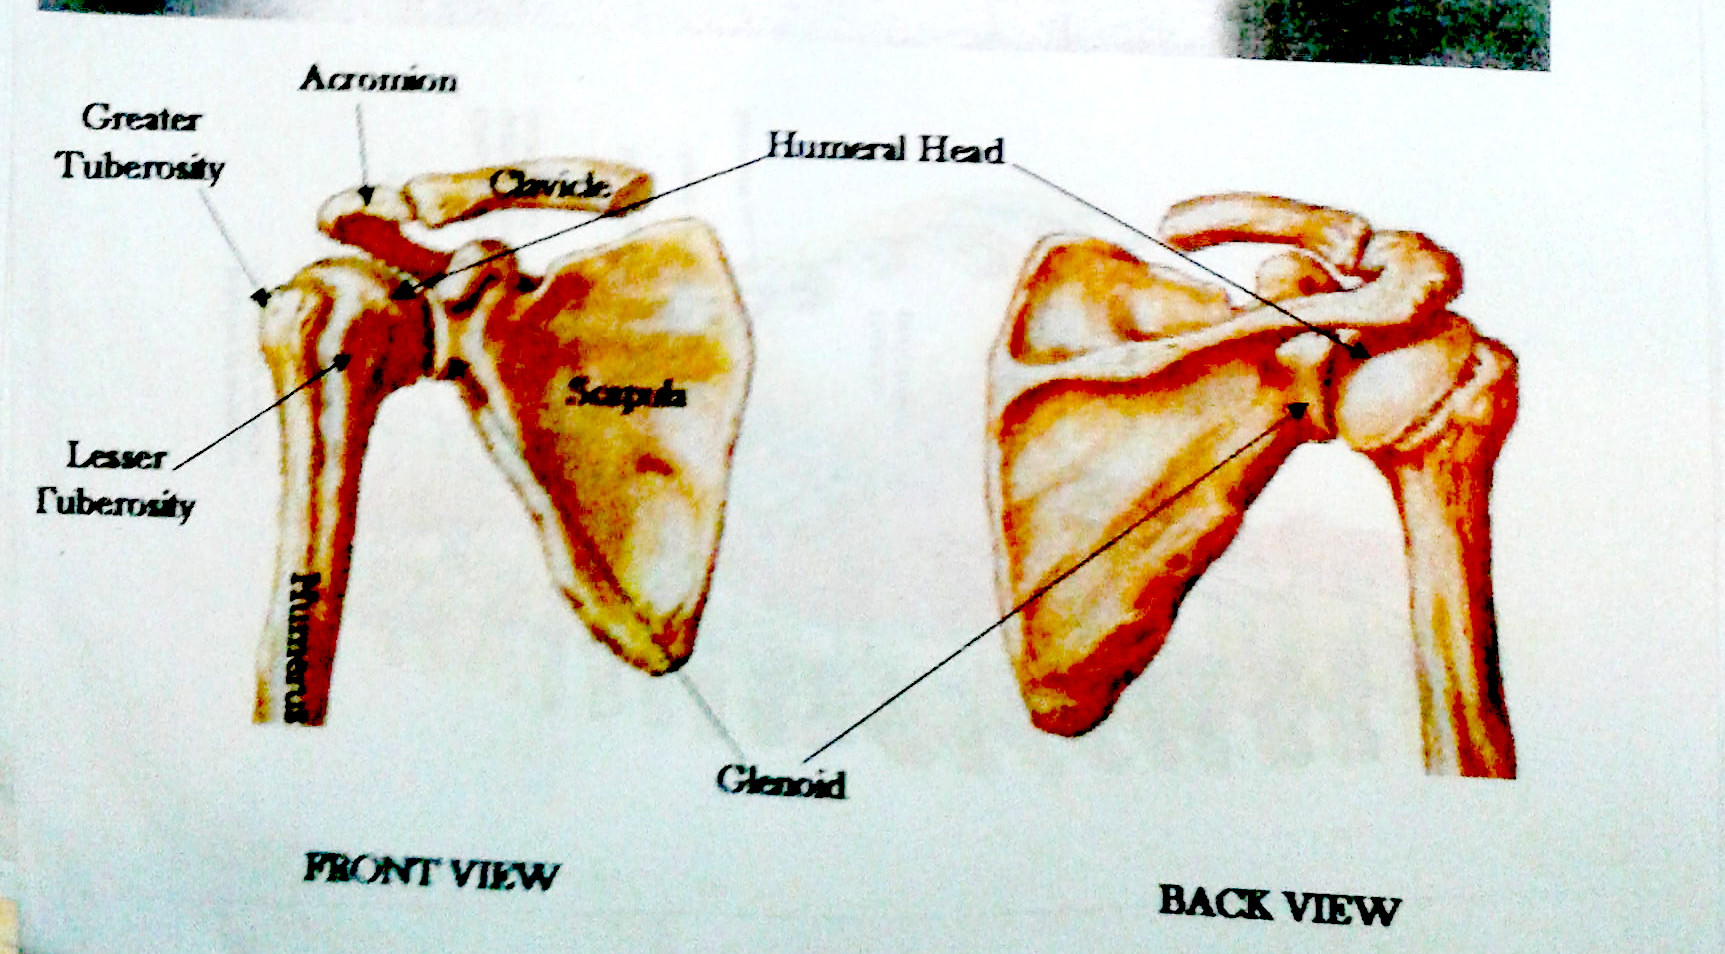 Diagram showing human scapular (shoulder bones) - wings! From K.J.Holmes lecture notes at London Contact Improvisation on 16 December 2017